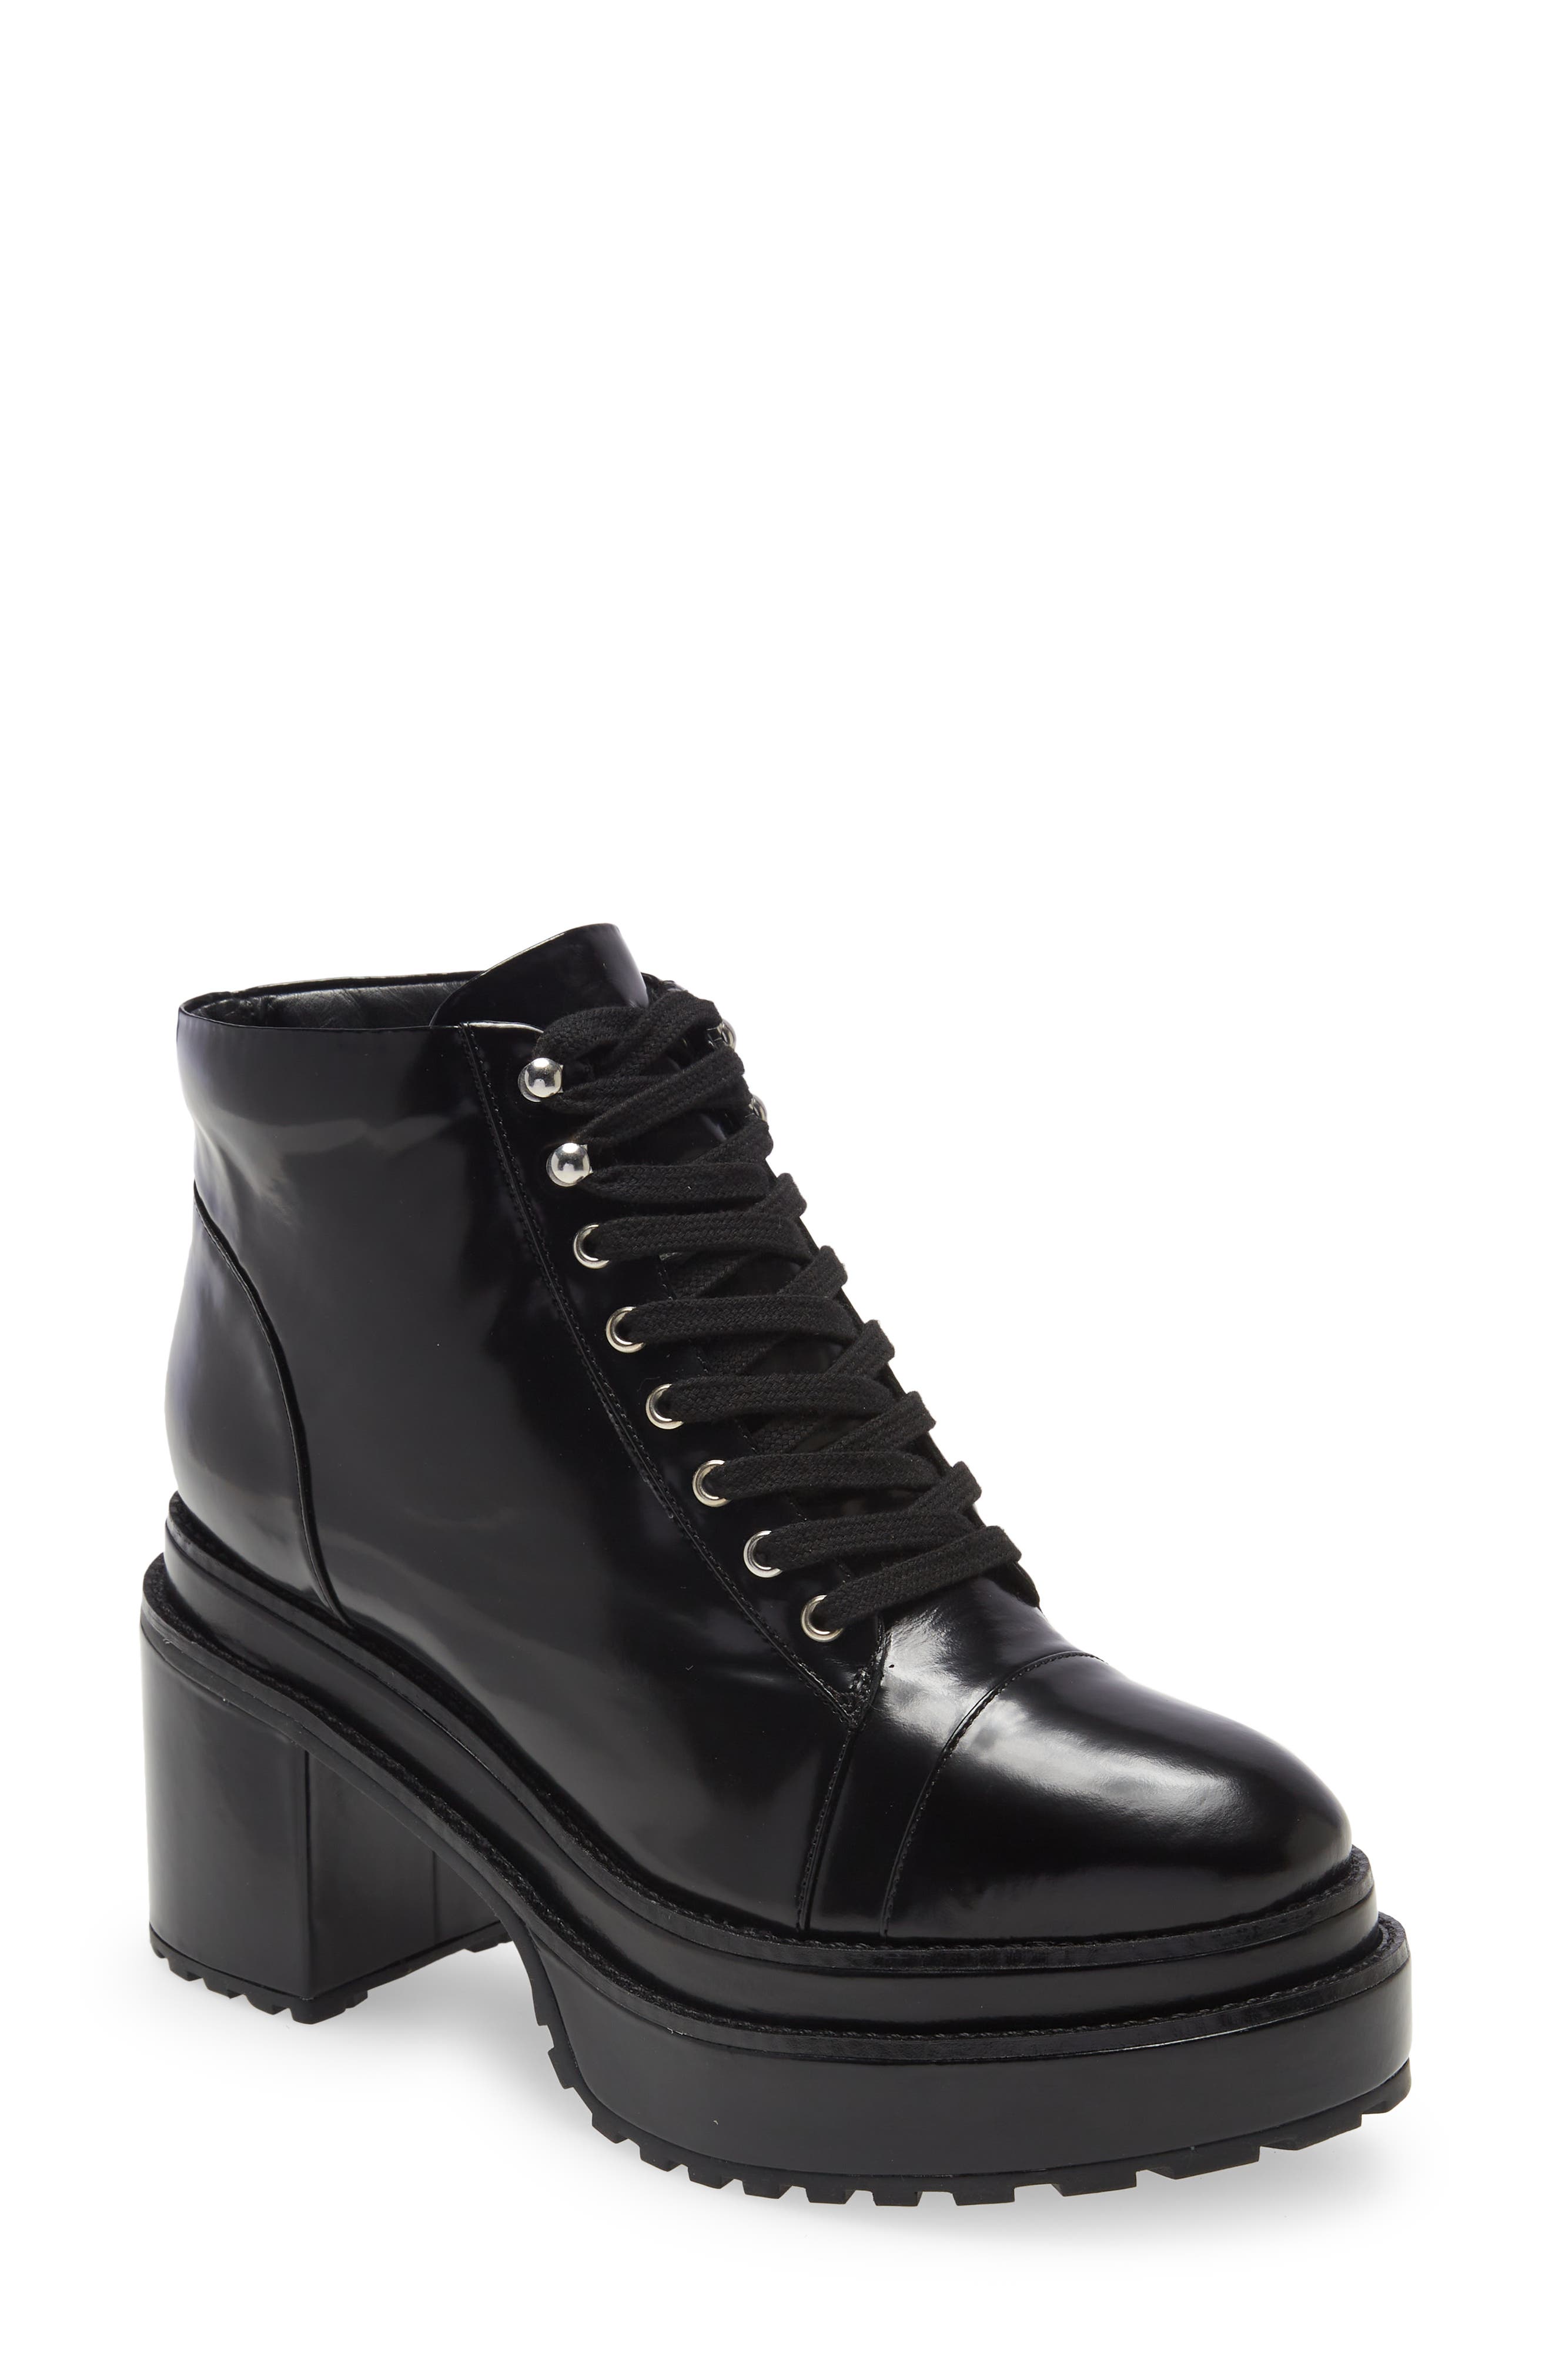 Cult Gaia Bratz Leather Boot in Black at Nordstrom